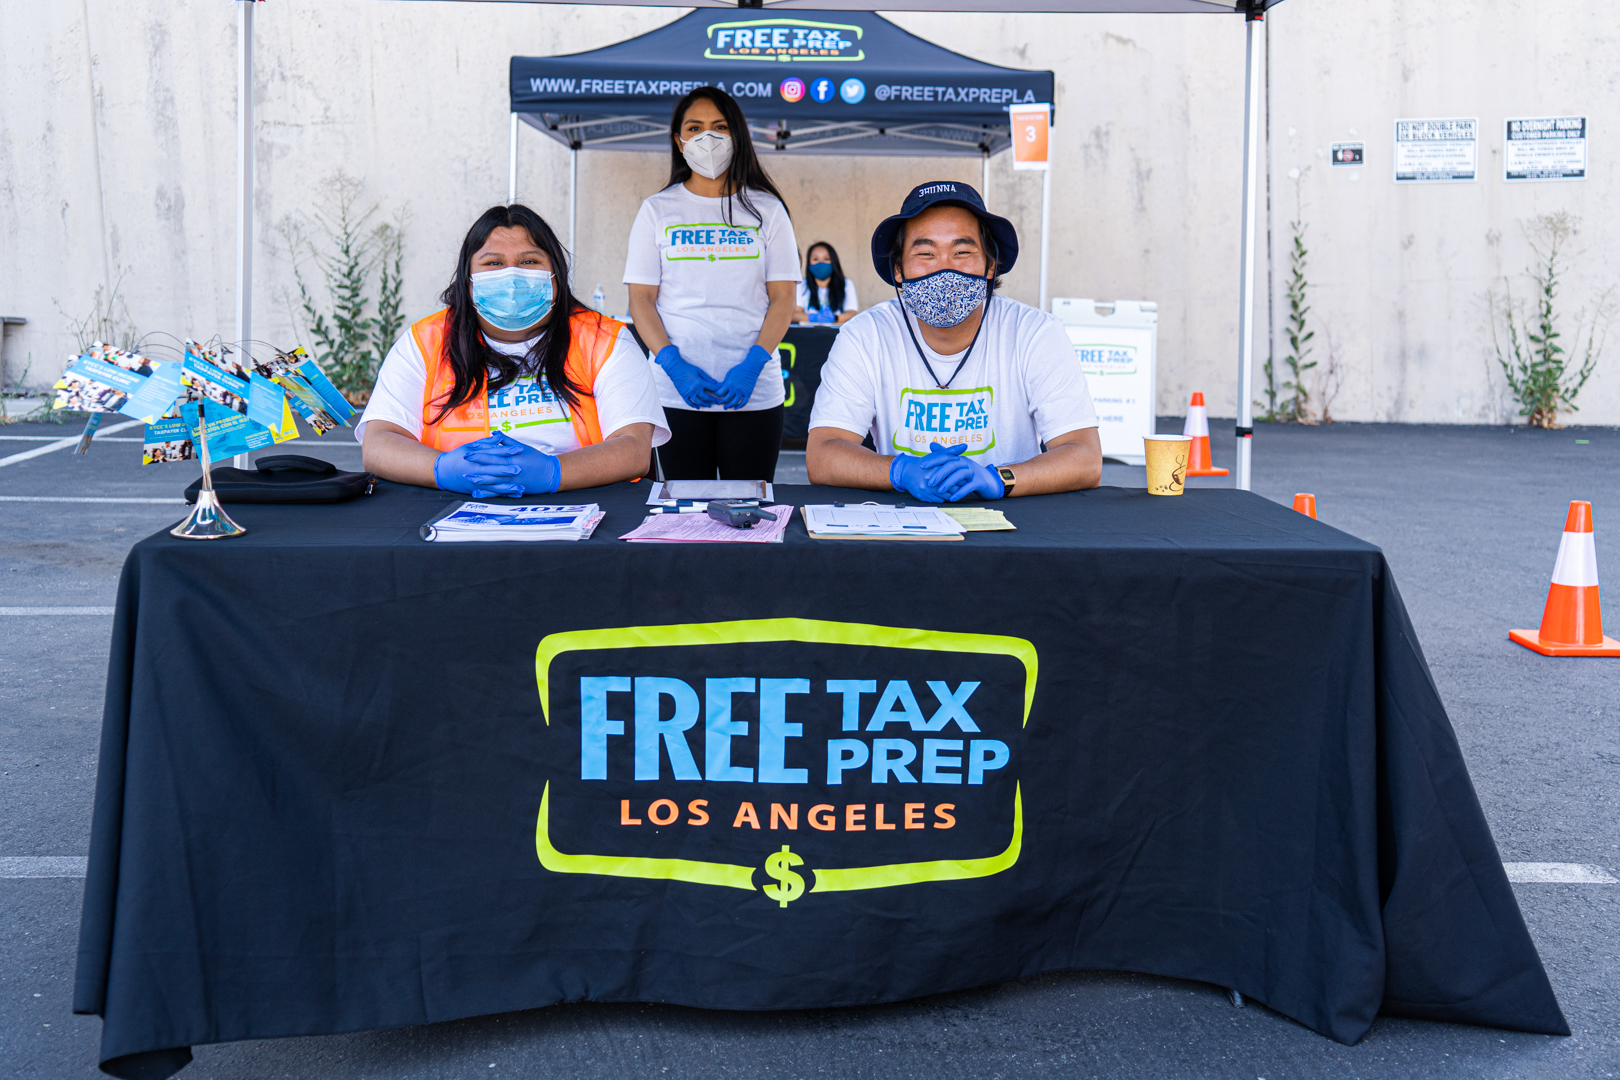 “Throughout the pandemic KYCC has offered Koreatown residents essential services such as tax filing advice, food deliveries, financial literacy courses and small business support.” 